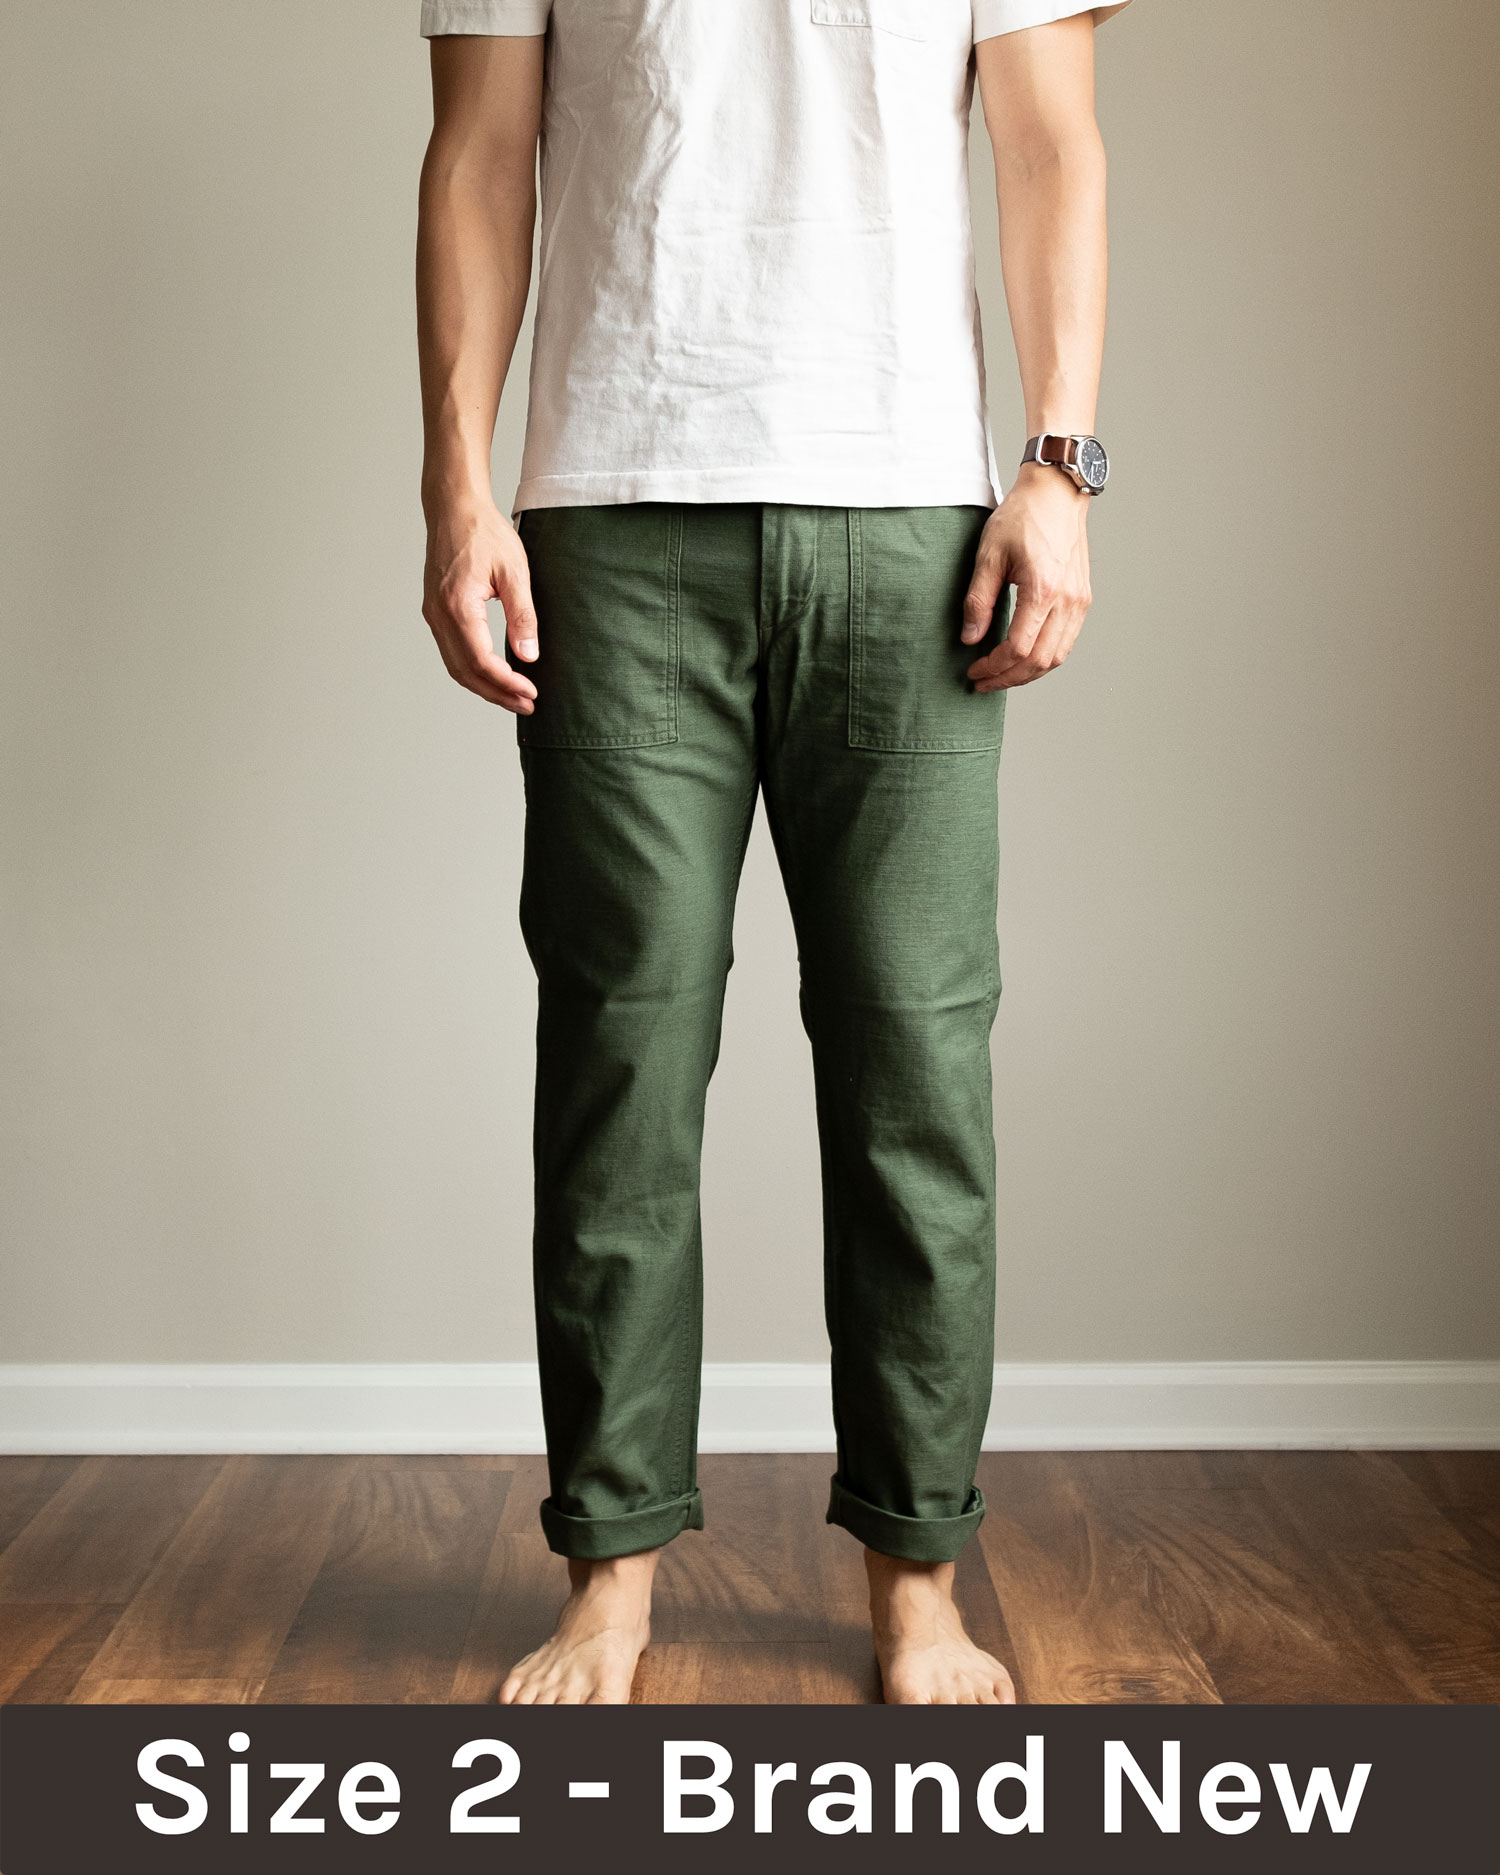 orslow slim fit fatigue pants with plain tee